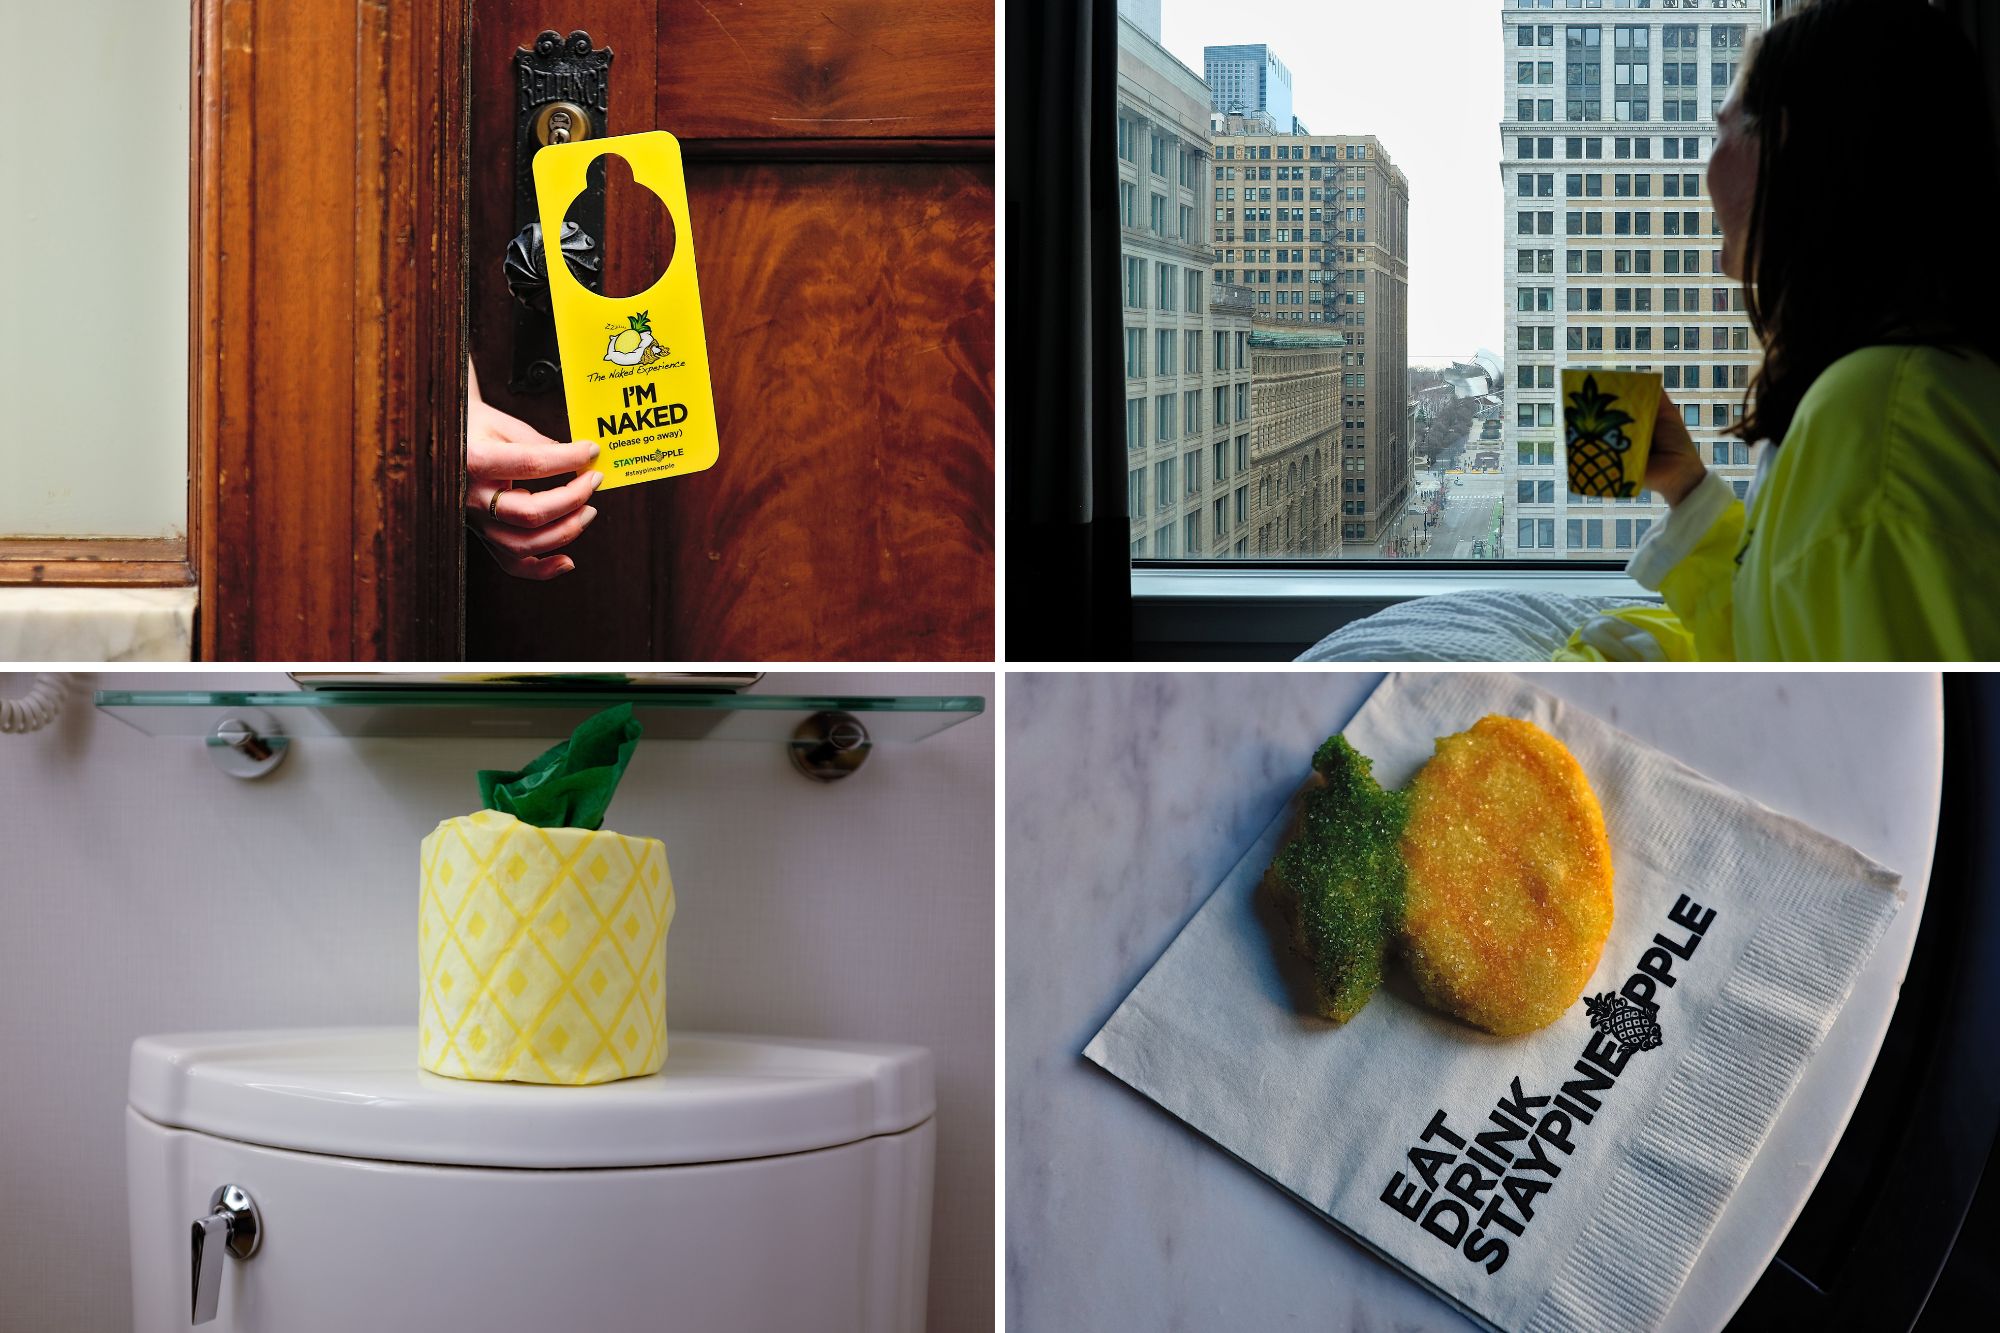 Collage of four images of pineapple accents: a do not disturb sign, a mug, a cookie, and a toilet paper